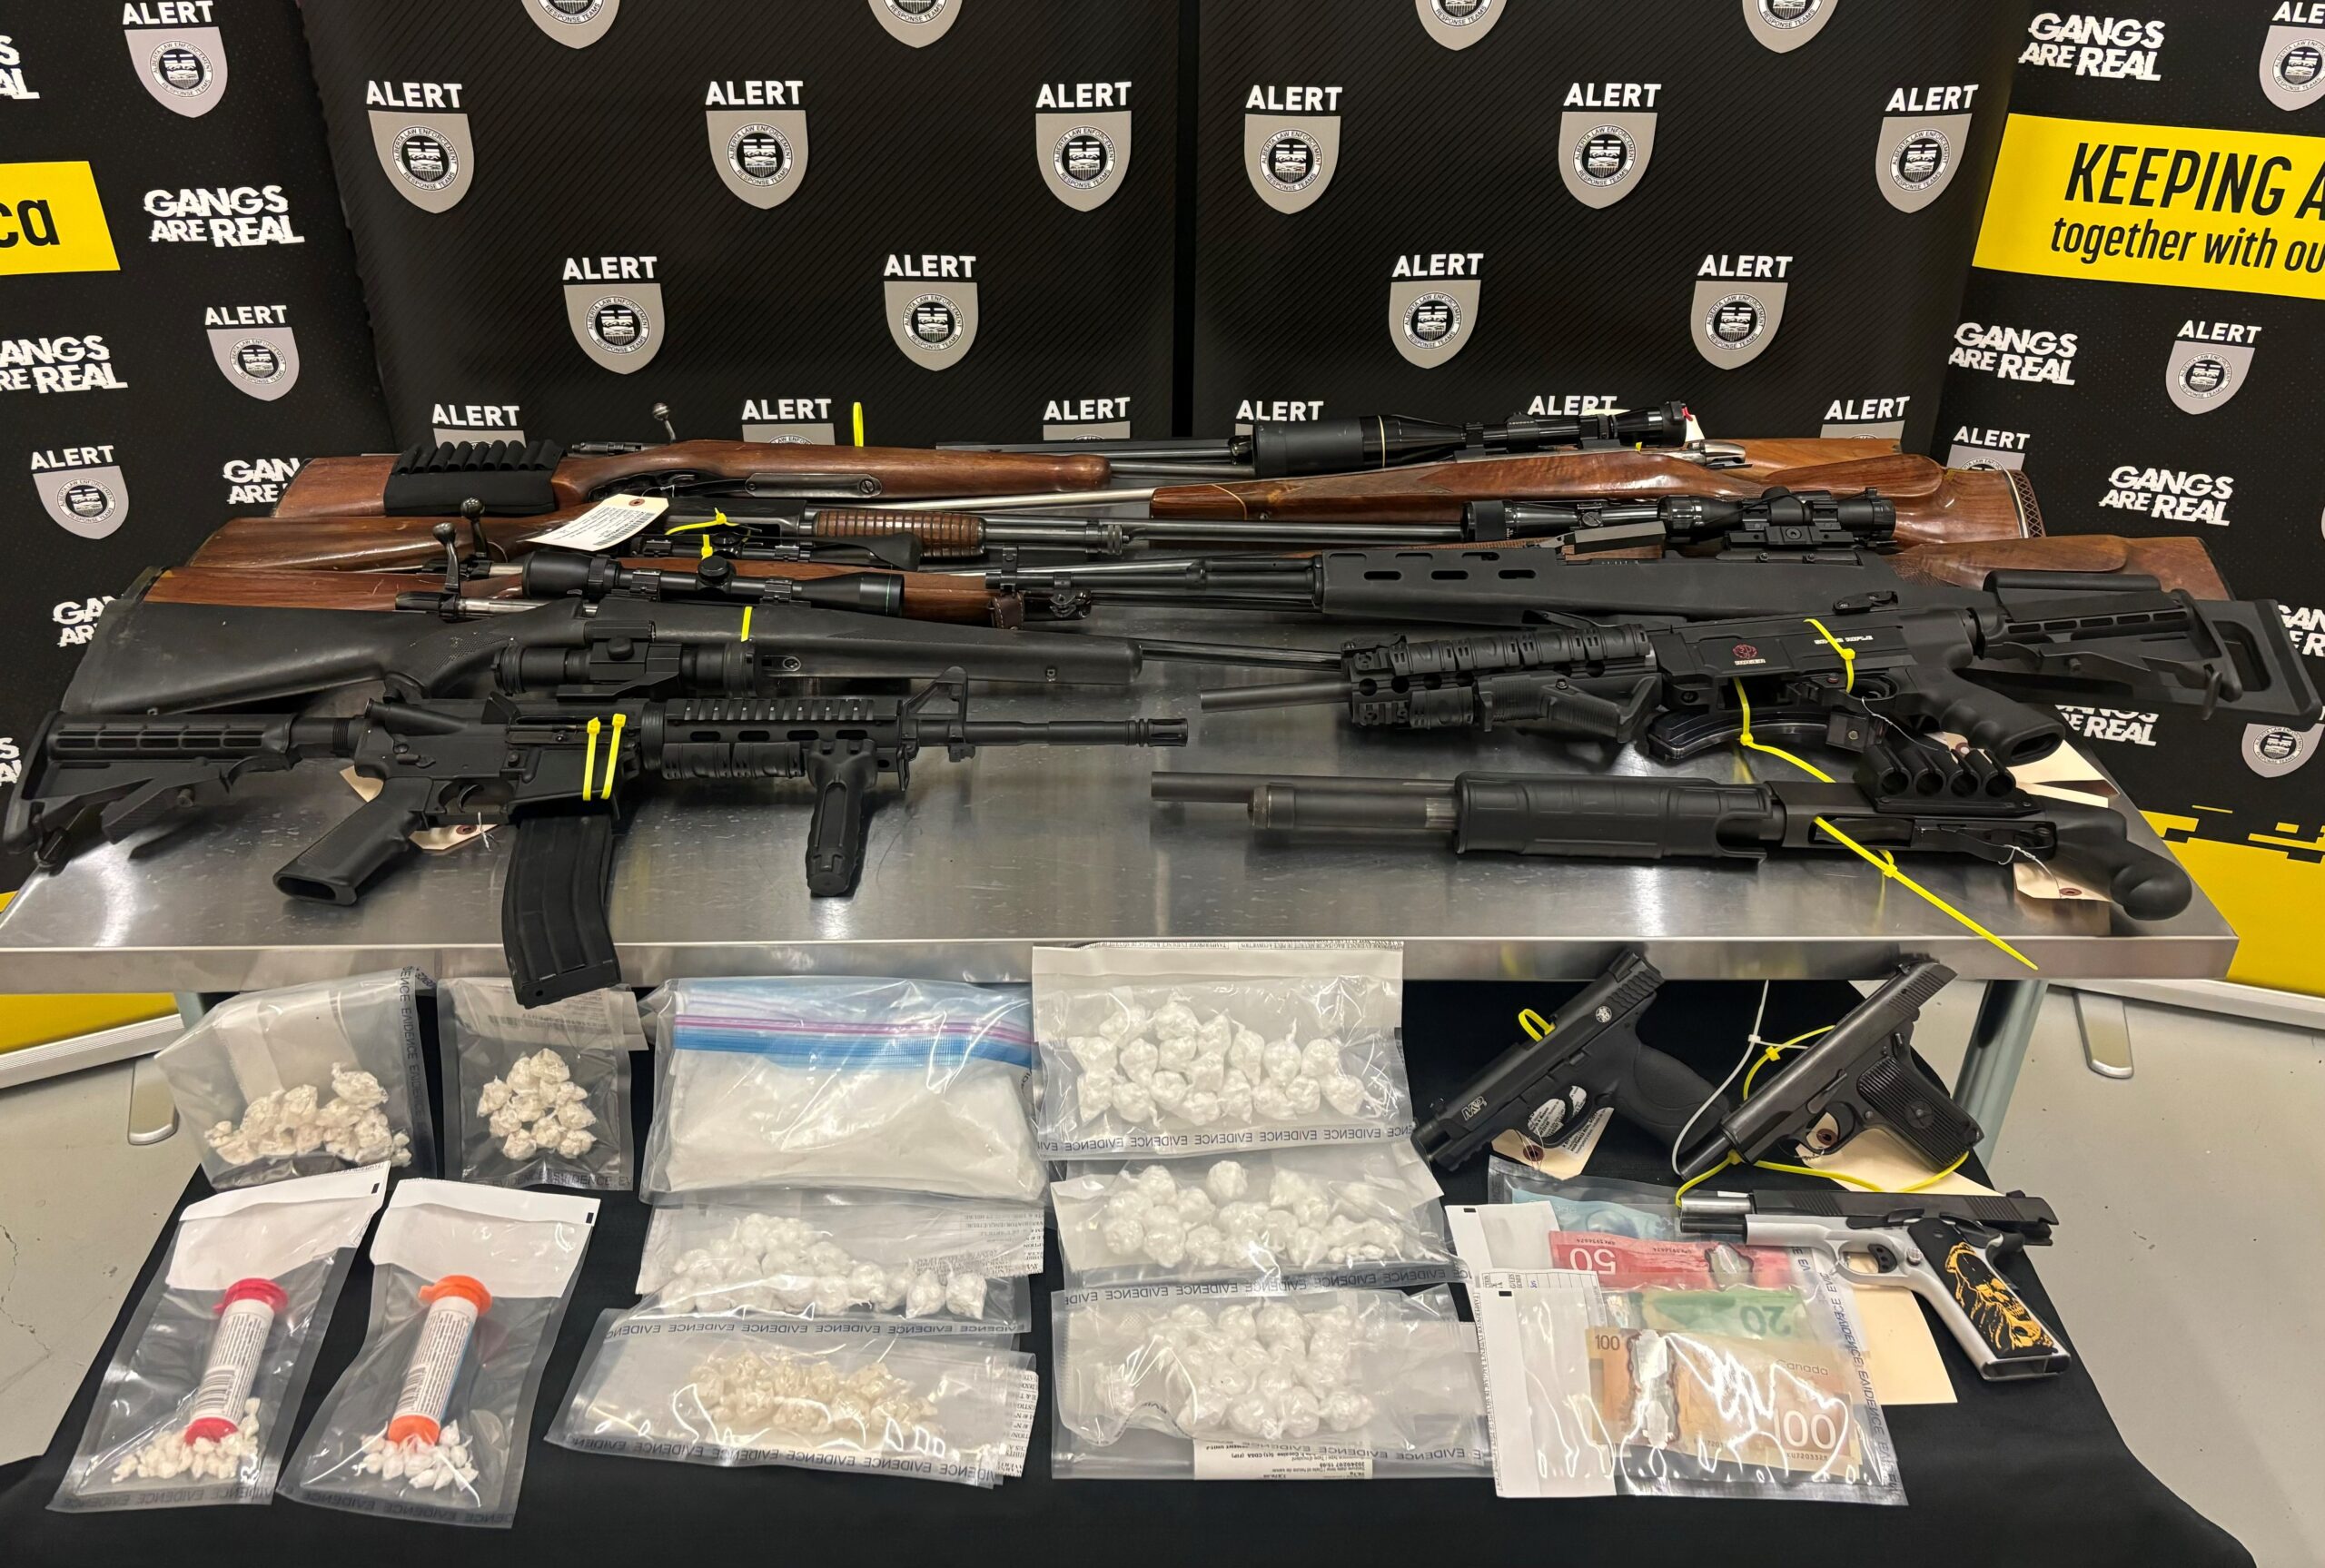 Firearms and cocaine seized in rural Alberta drug bust